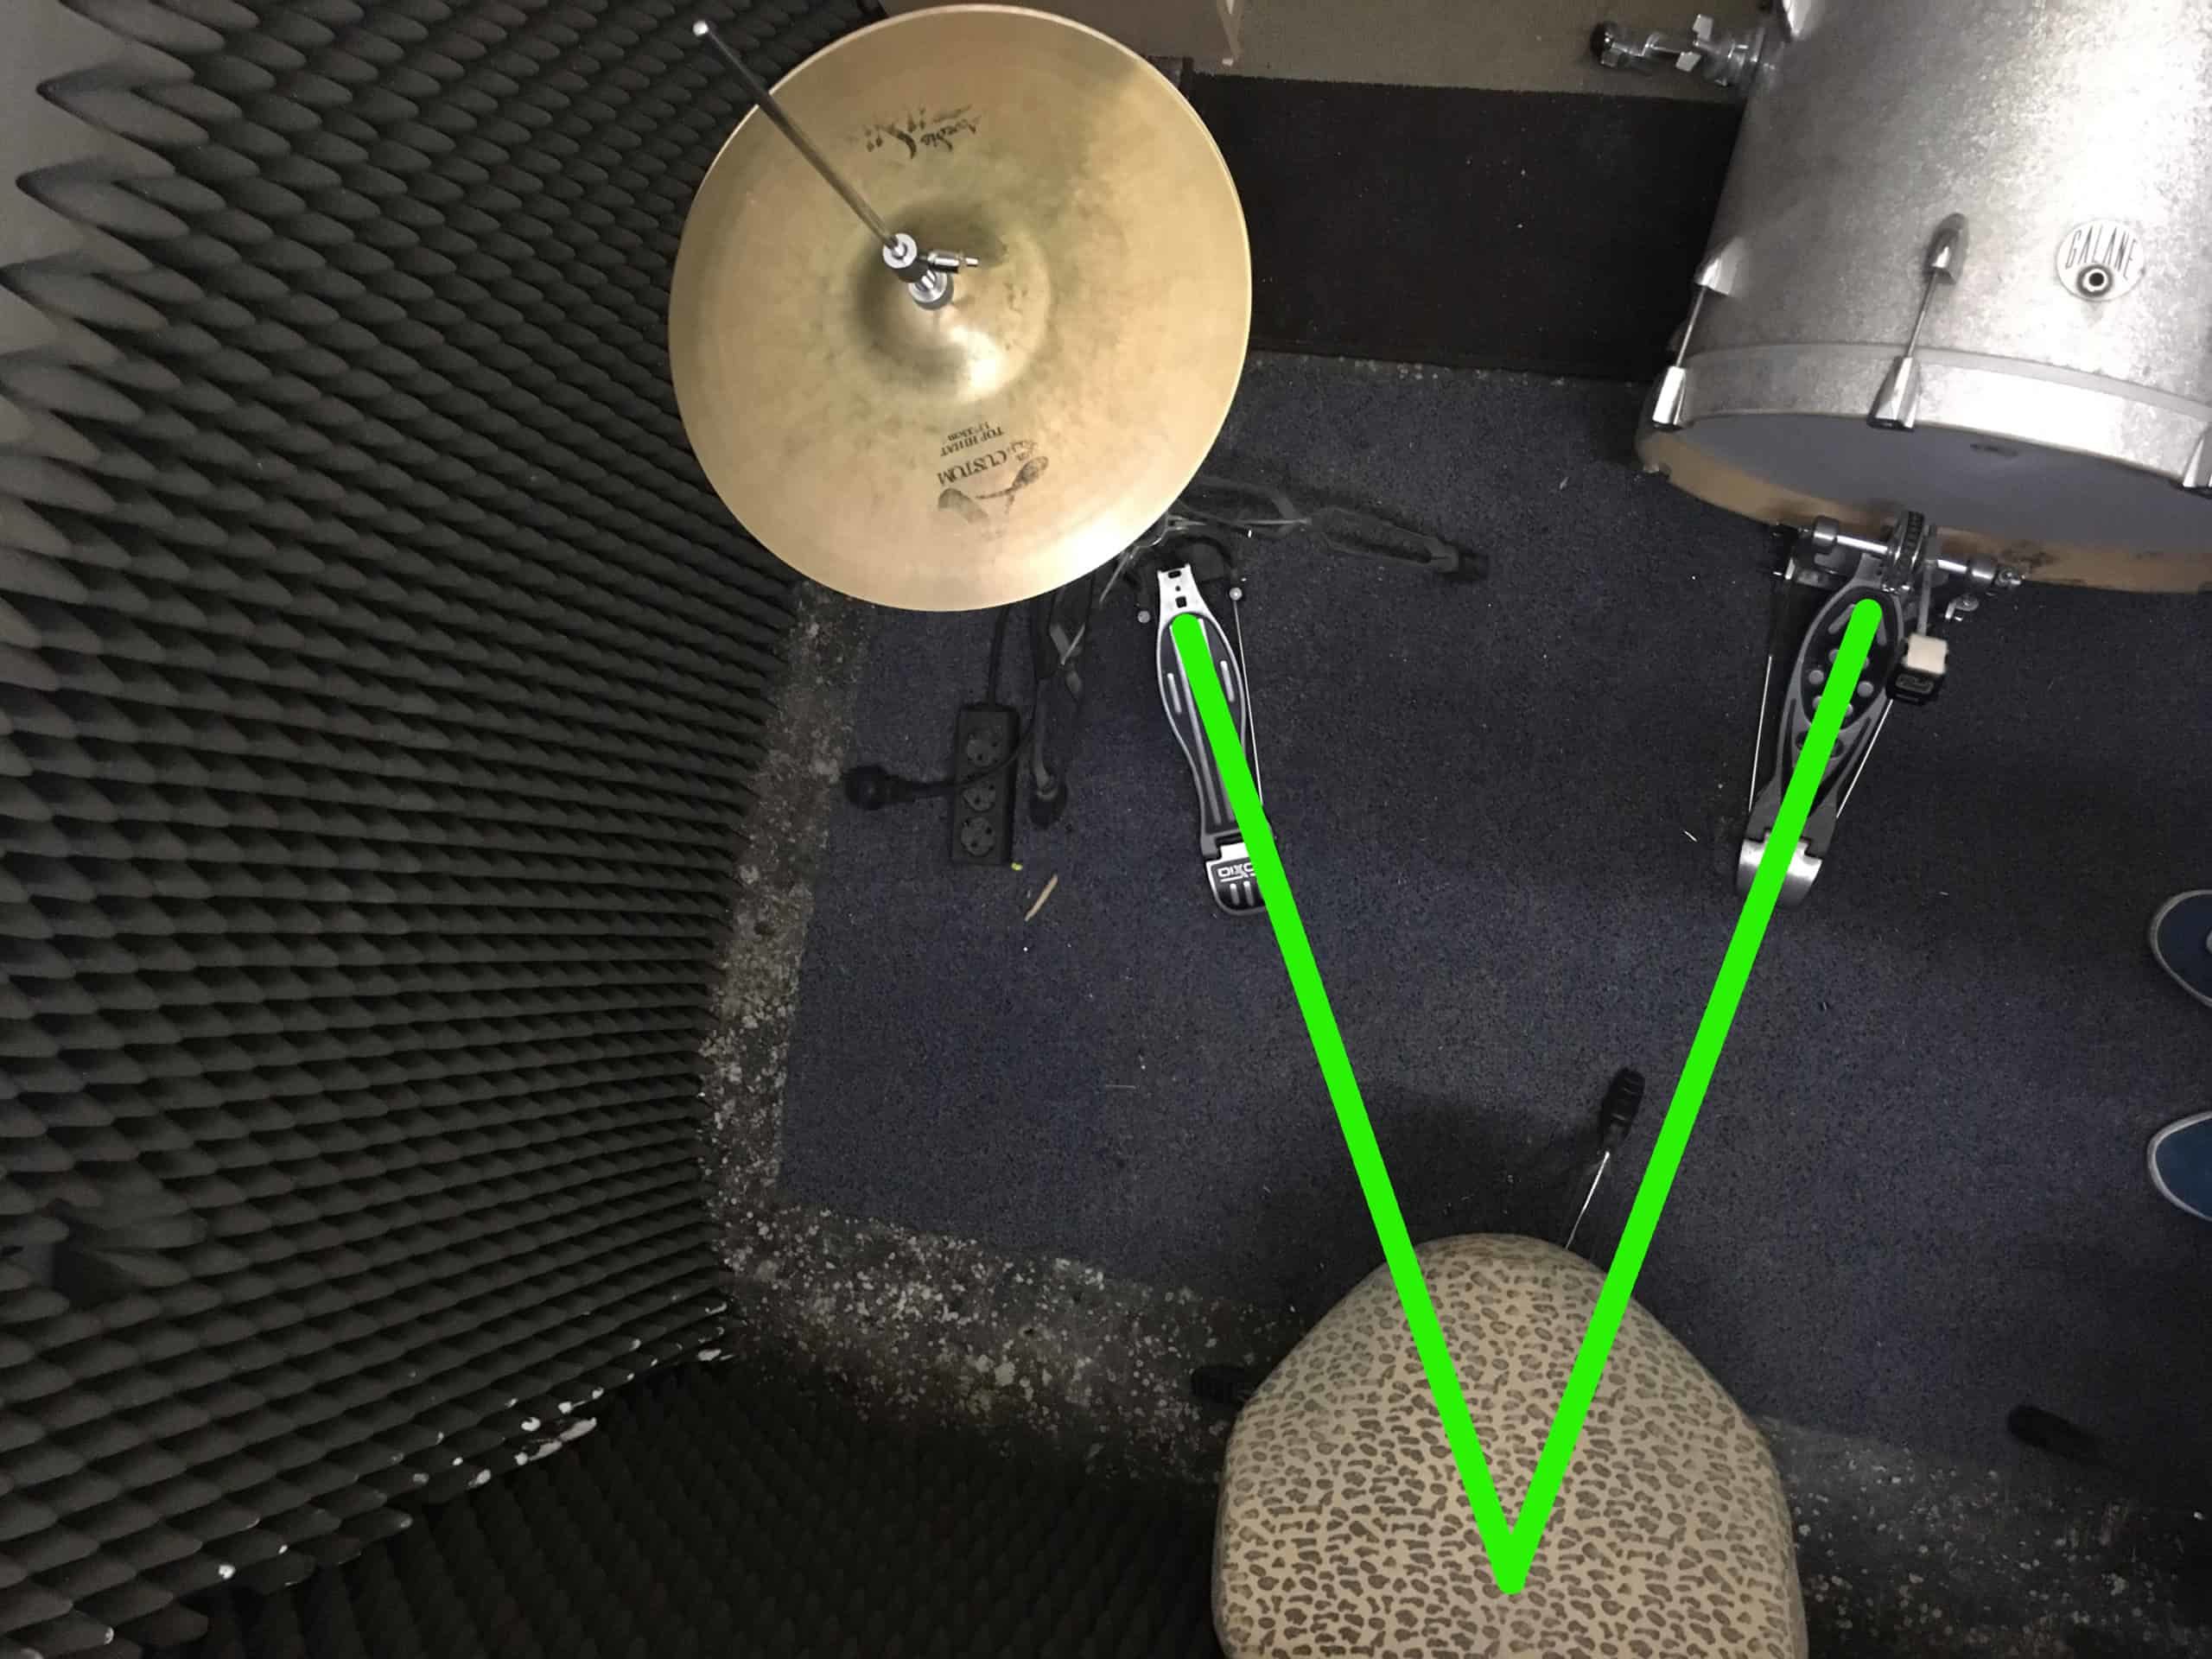 How to position Bassdrum and HiHat